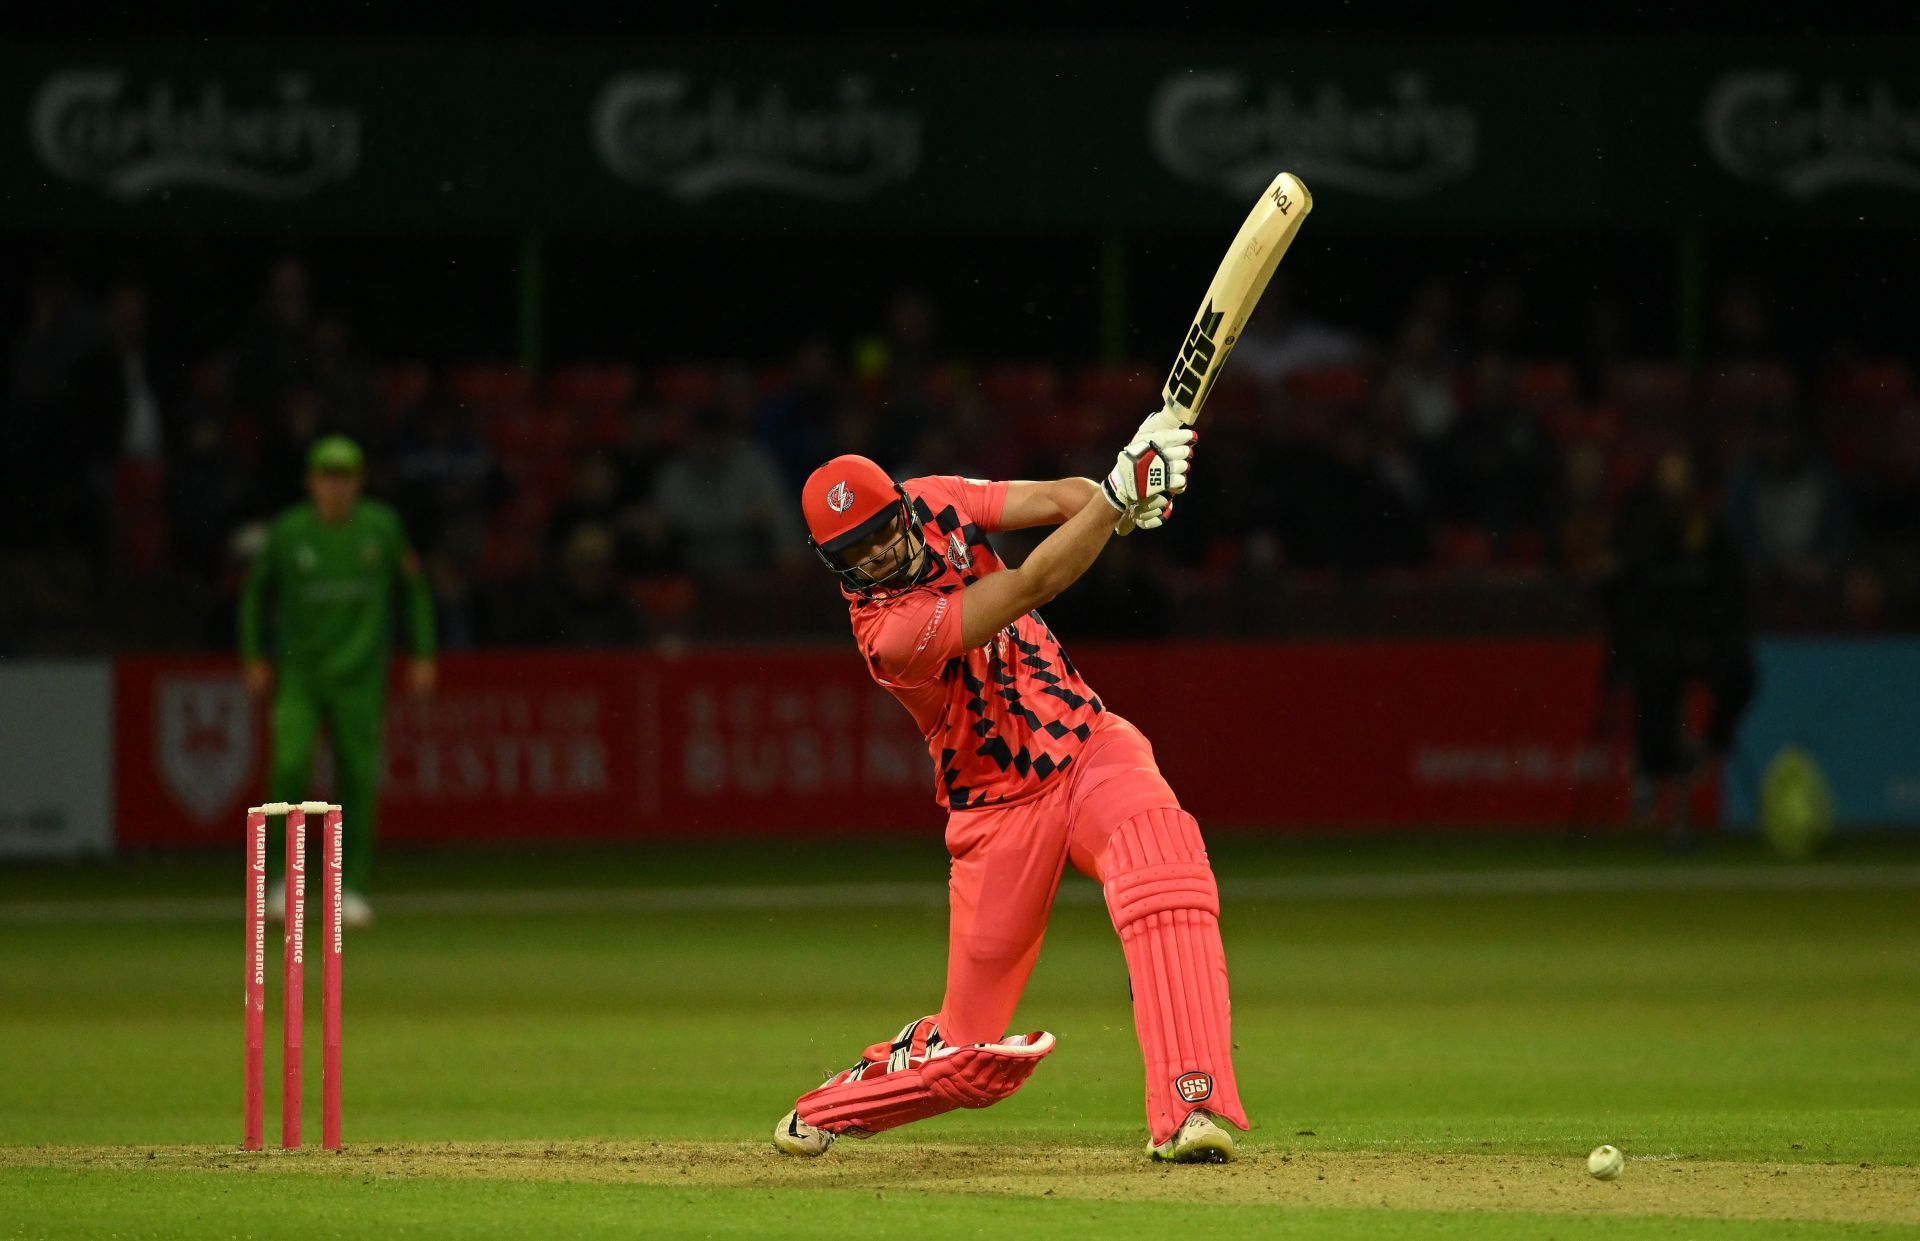 Tim David is one of the most sought after players in global T20 leagues